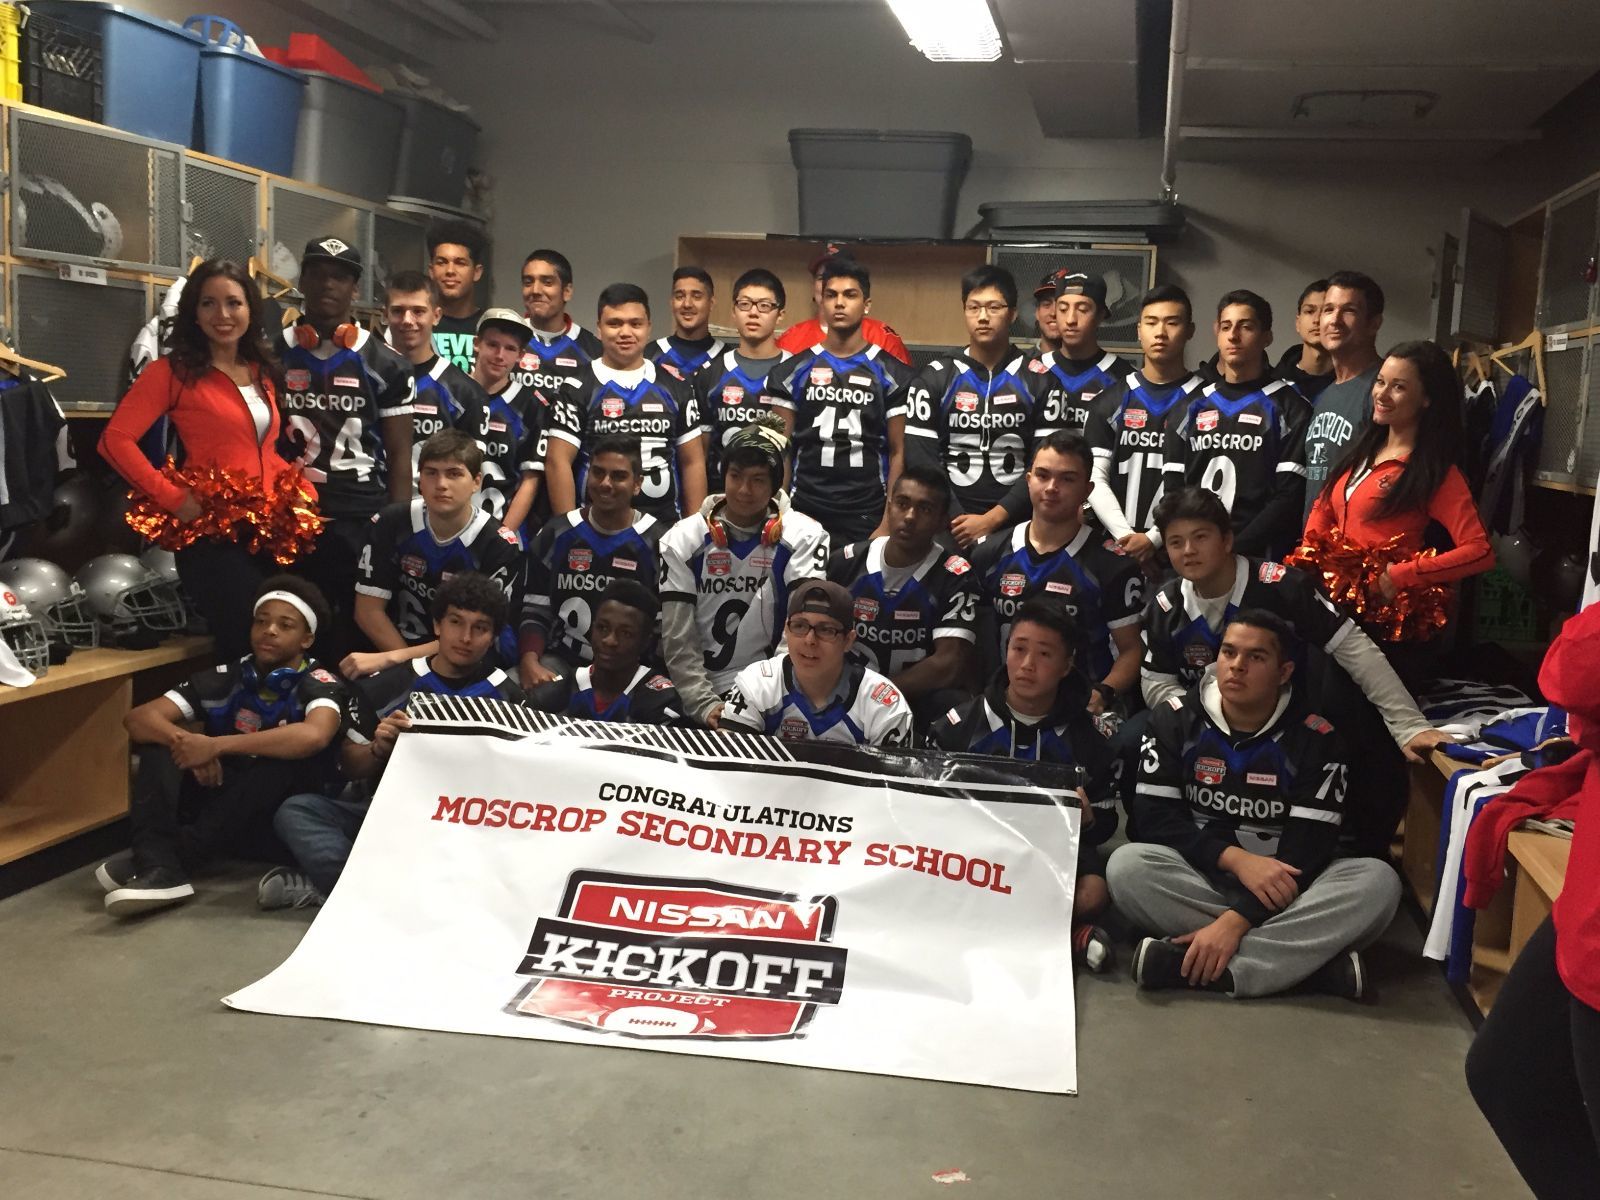 Nissan Kickoff Project - Moscrop Highschool Donation